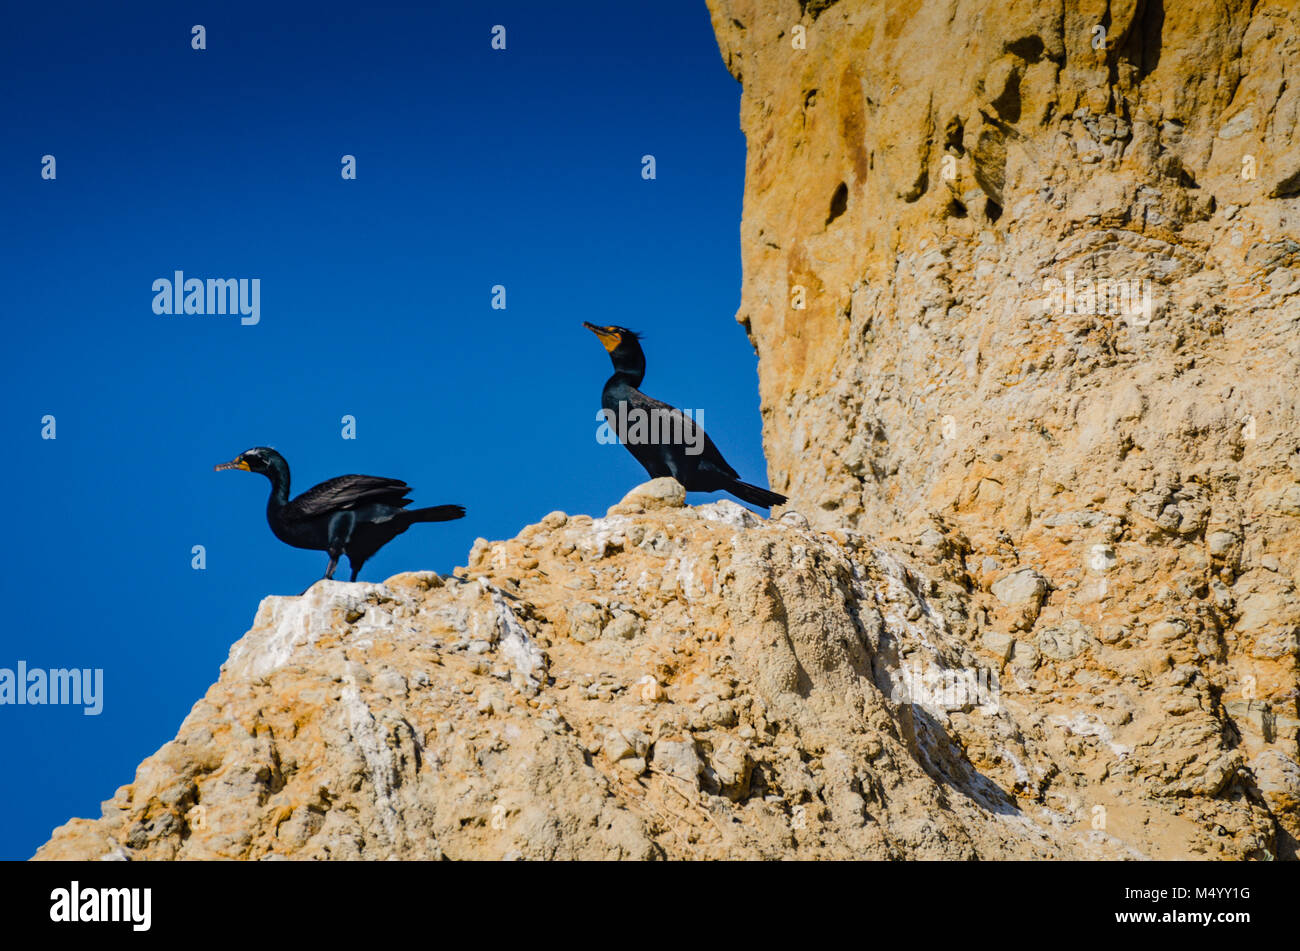 Pair of Brandt's Cormorant birds roosting on cliffs at Torrey Pines State Natural Preserve. Stock Photo